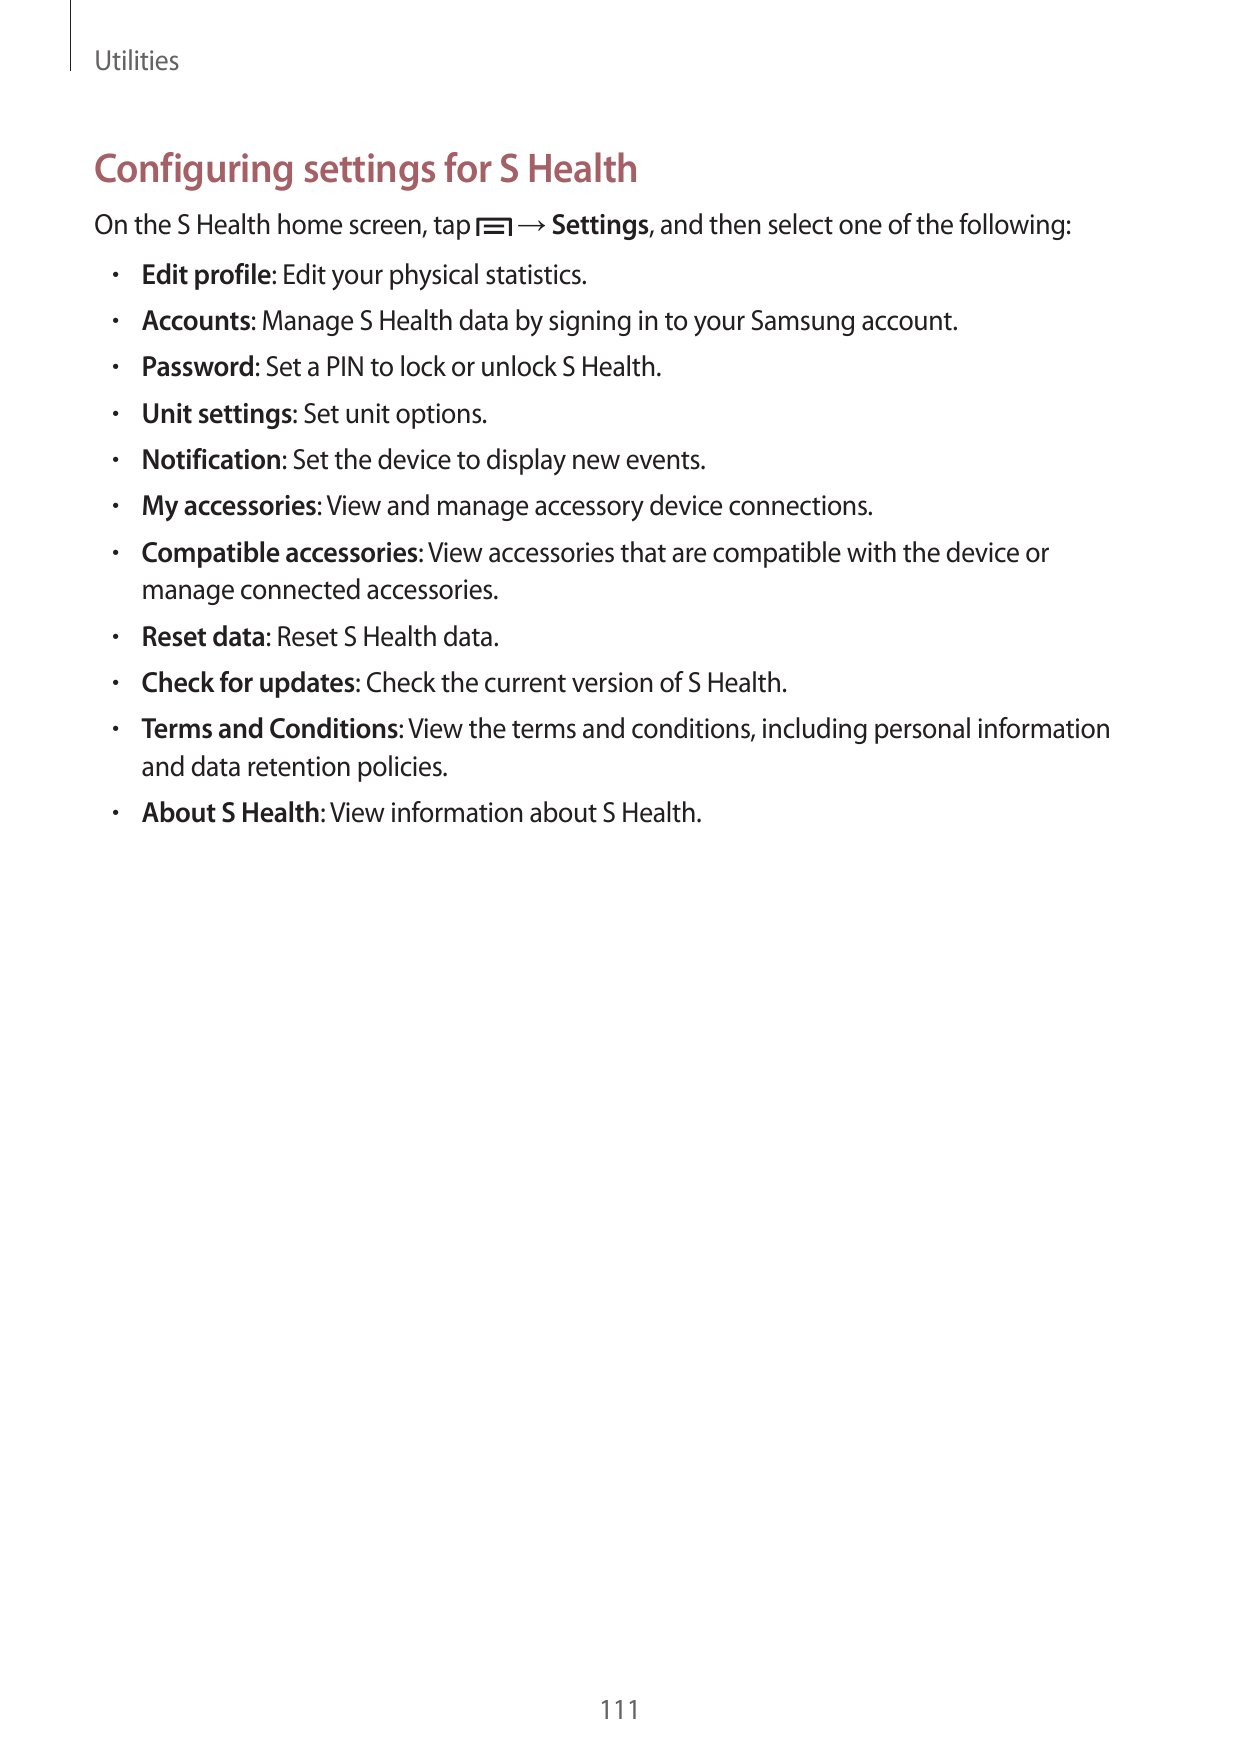 UtilitiesConfiguring settings for S HealthOn the S Health home screen, tap→ Settings, and then select one of the following:• Edi